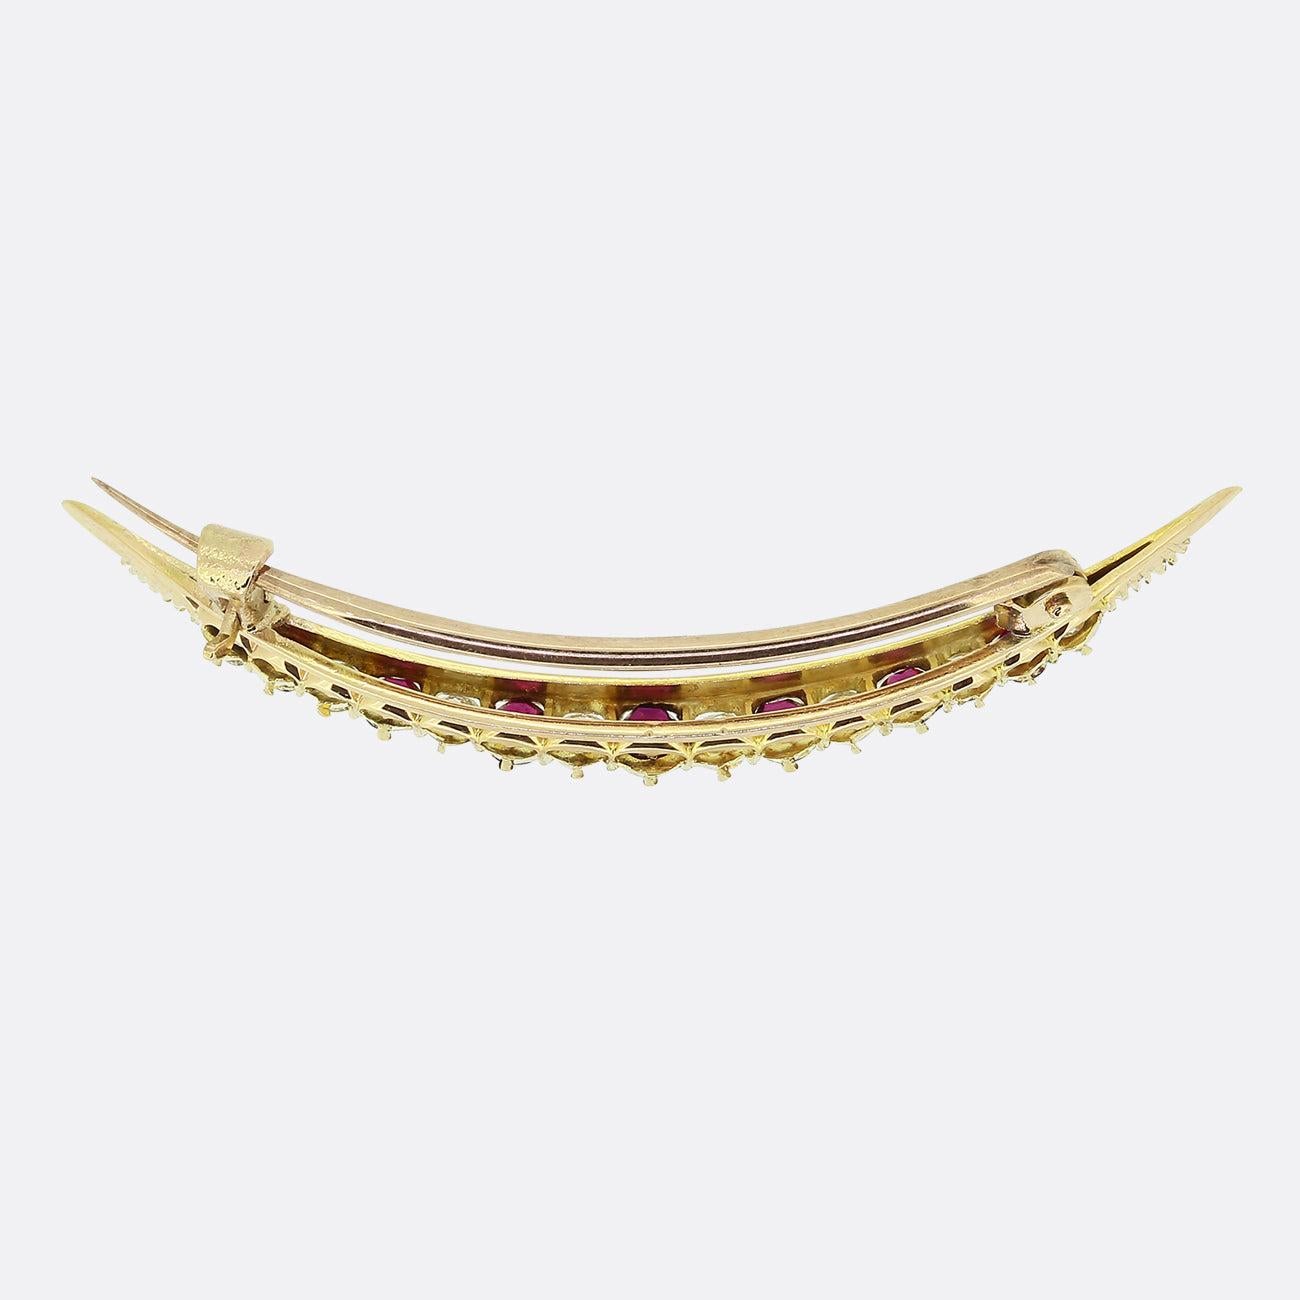 Here we we have a classic crescent brooch dating back to the Edwardian era. This antique piece has been crafted from 18ct yellow gold into the shape of a moon crescent which plays host to a single row of alternating rubies and diamonds. The rubies